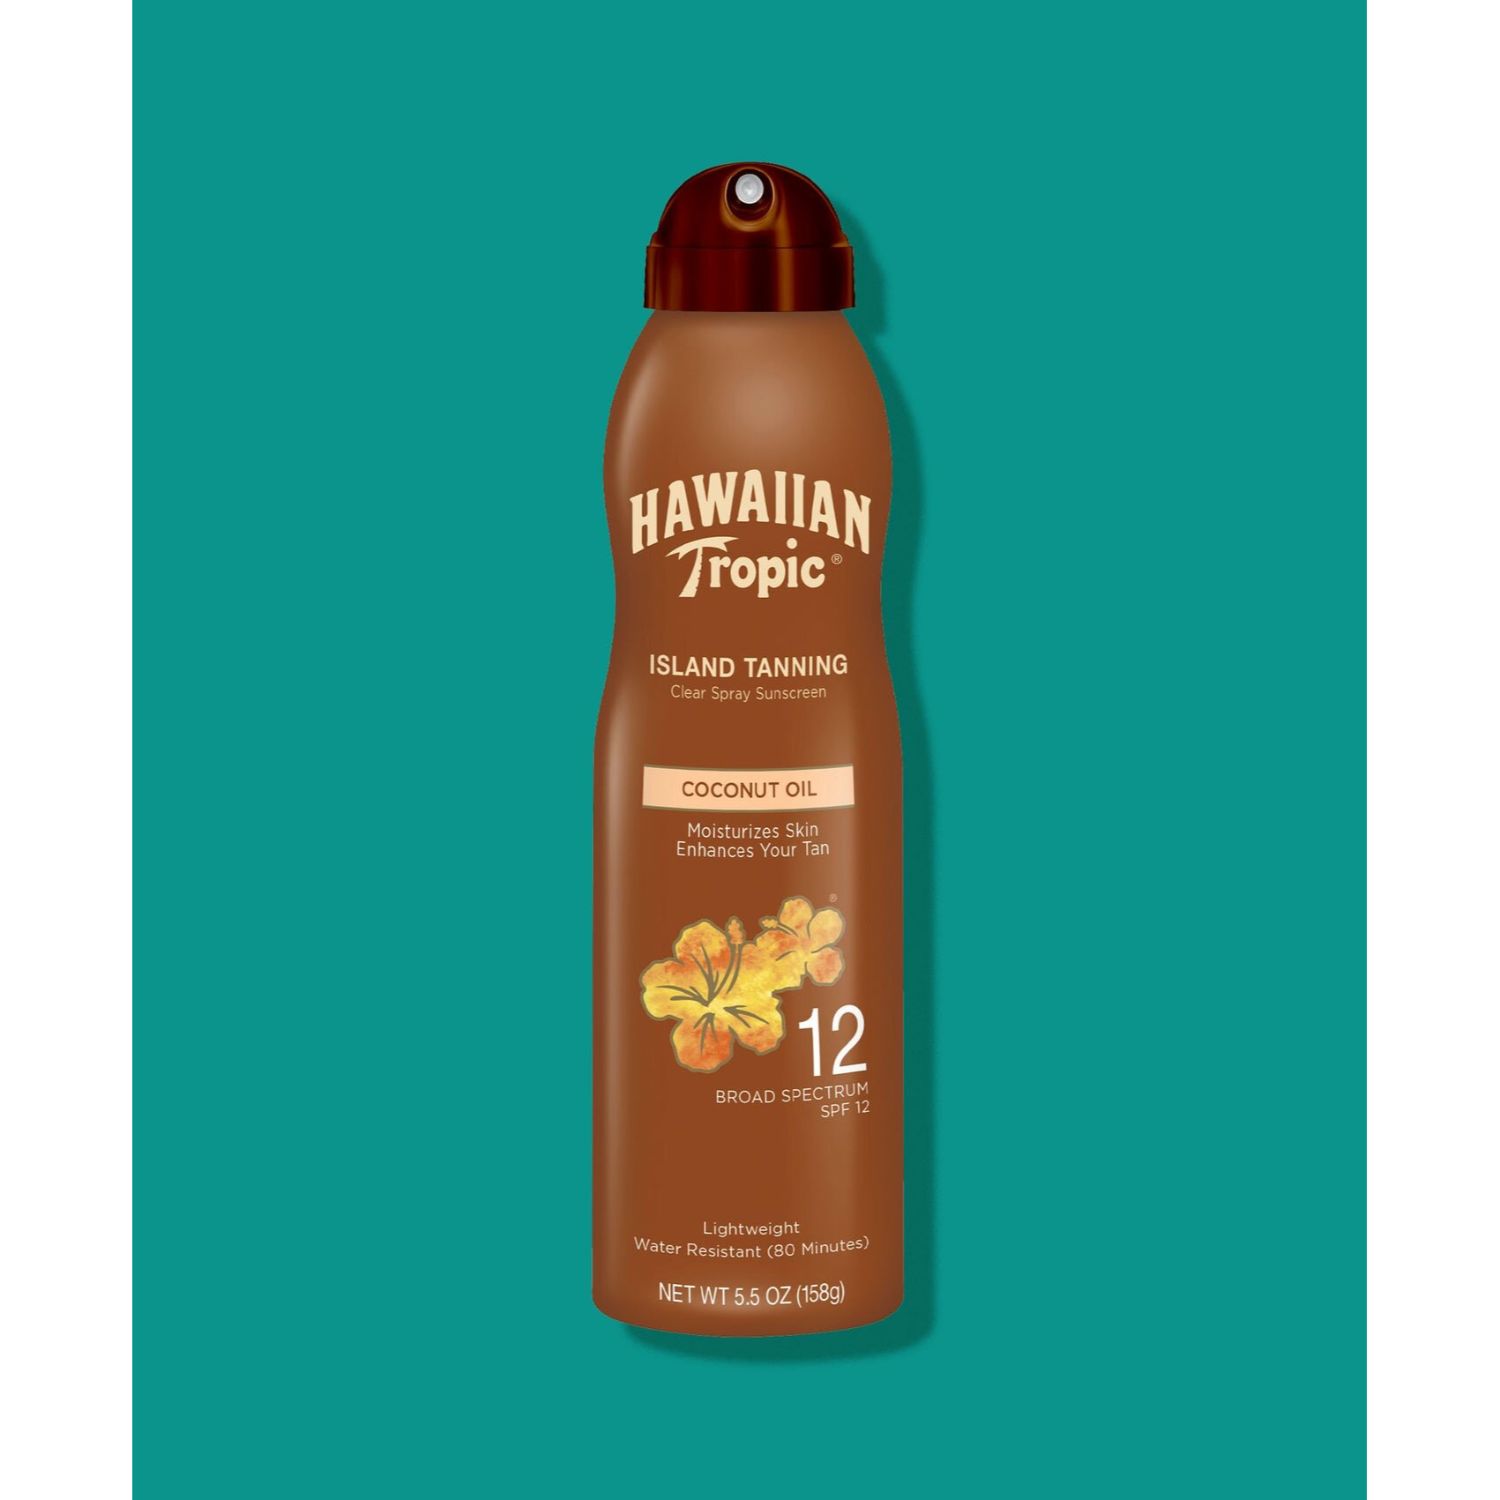 Product Image for Hawaiian Tropic Tanning Dry Oil Continuous Spray SPF 12 158g